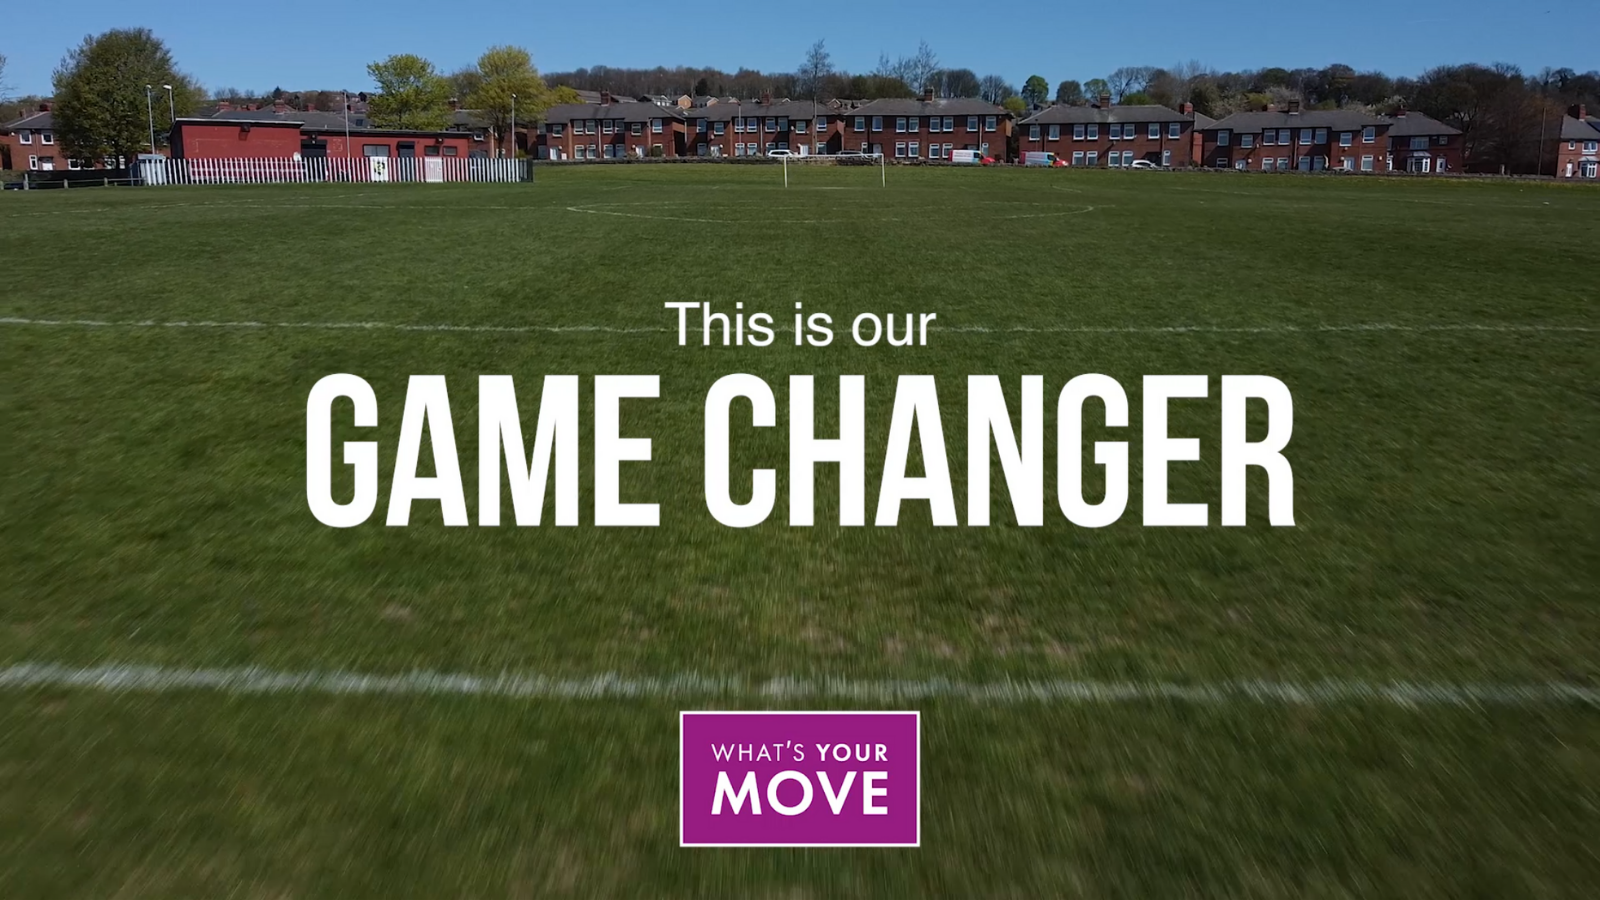 Image of a football pitch with a What's Your Move logo